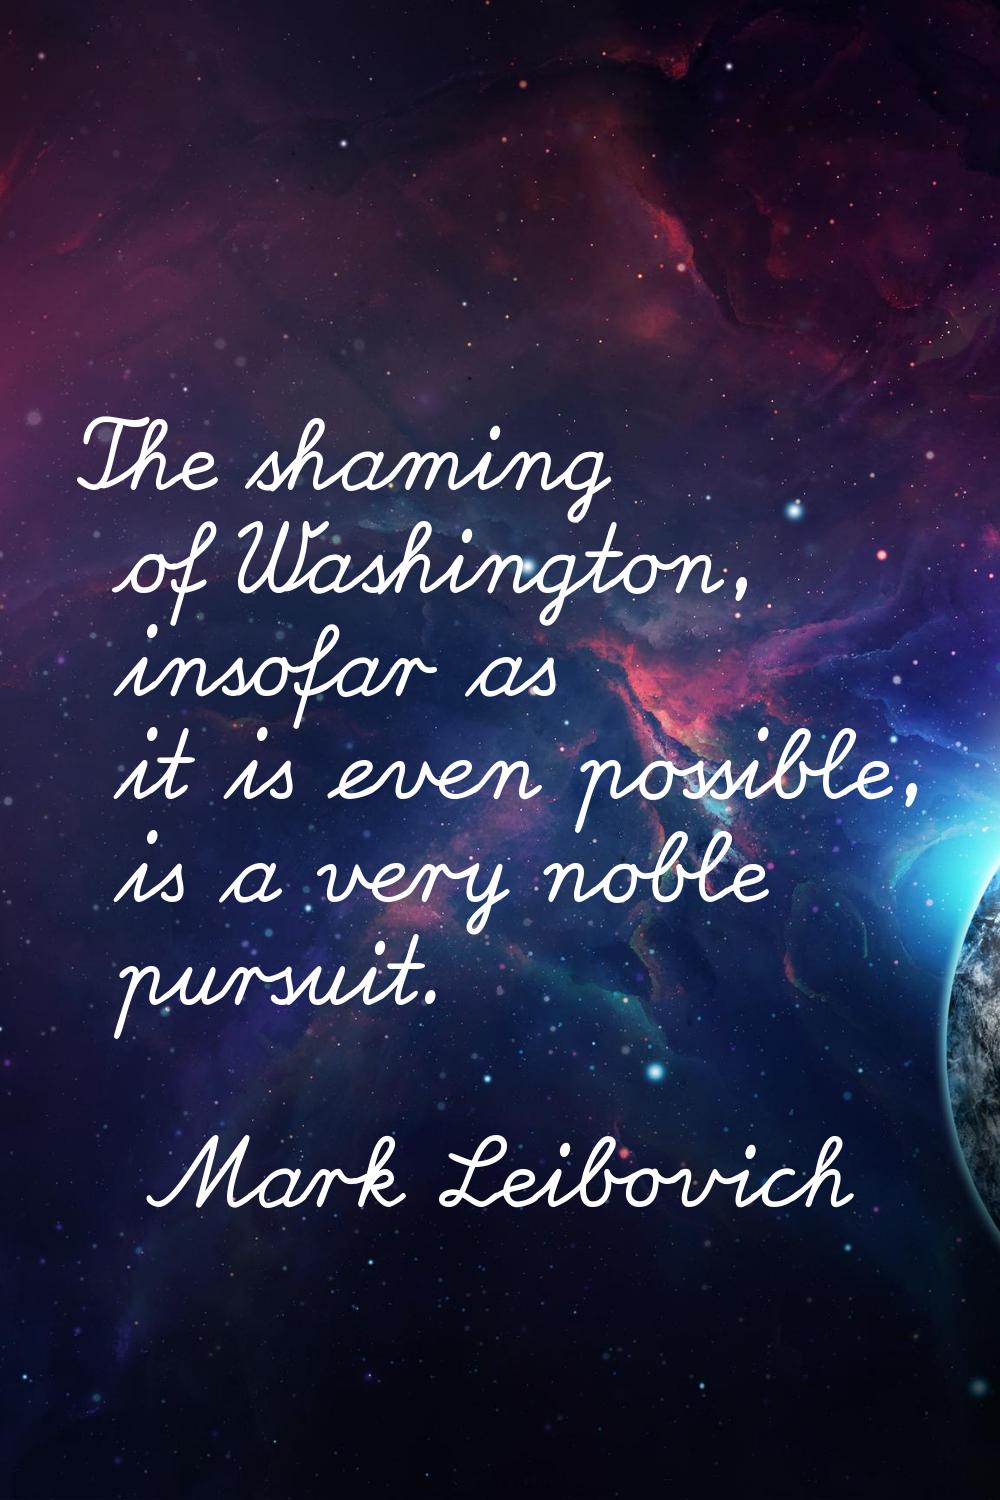 The shaming of Washington, insofar as it is even possible, is a very noble pursuit.